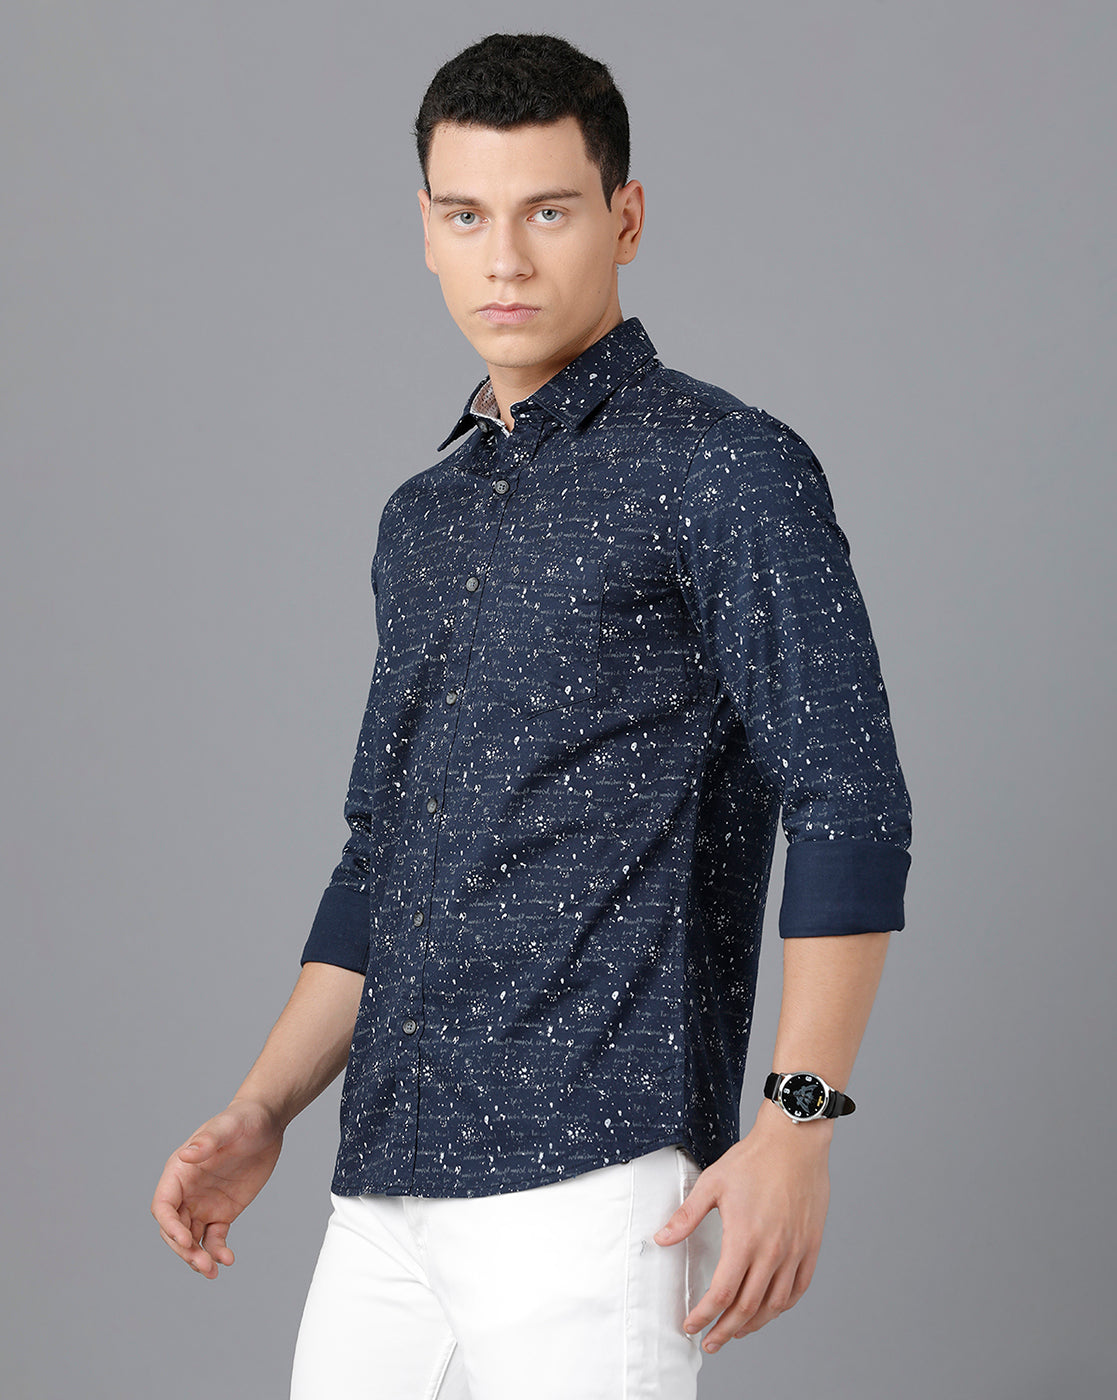 Classic Polo Mens Cotton Full Sleeve Printed Slim Fit Blue Color Spread Collar Woven Shirt | Sn2-52 A